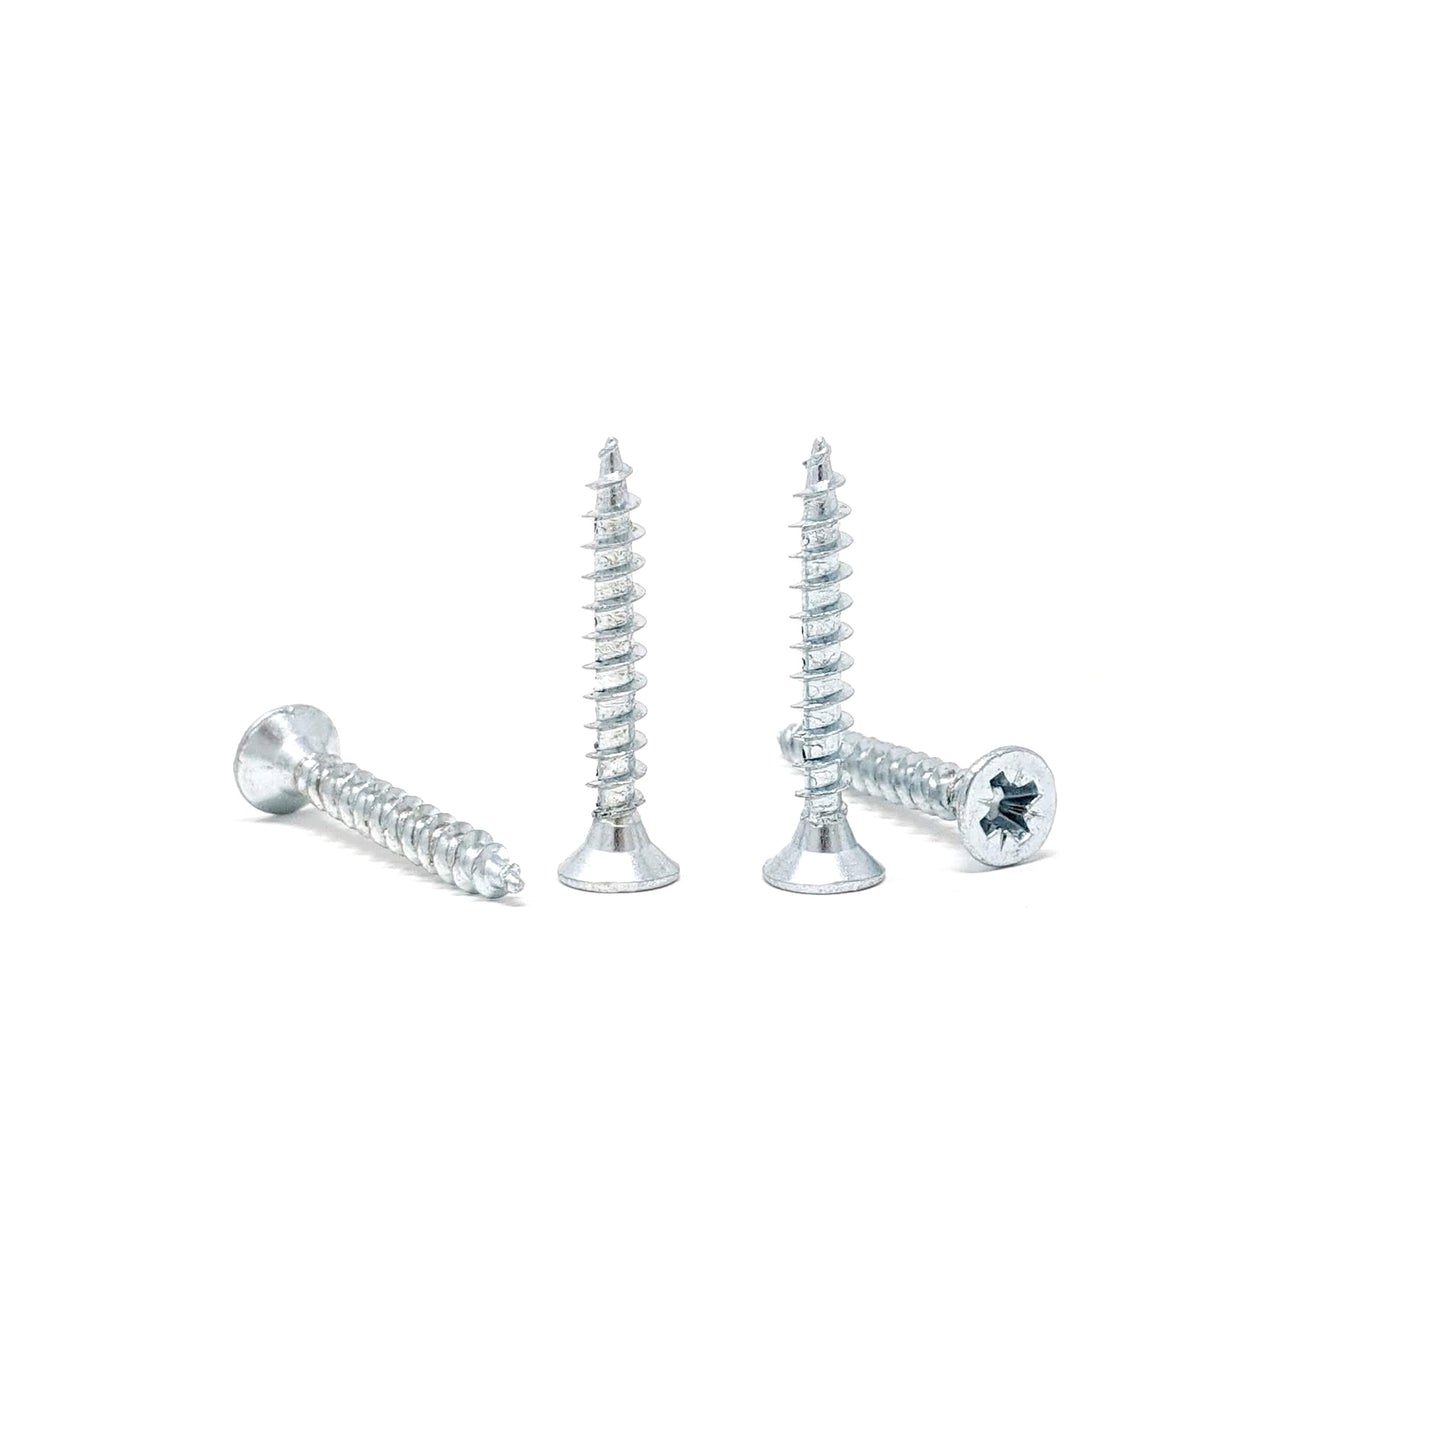 Wood Screws, Pozi Countersunk 3.5mm (No.6) Zinc Plated Steel | Made in Germany | Keay Vital Parts